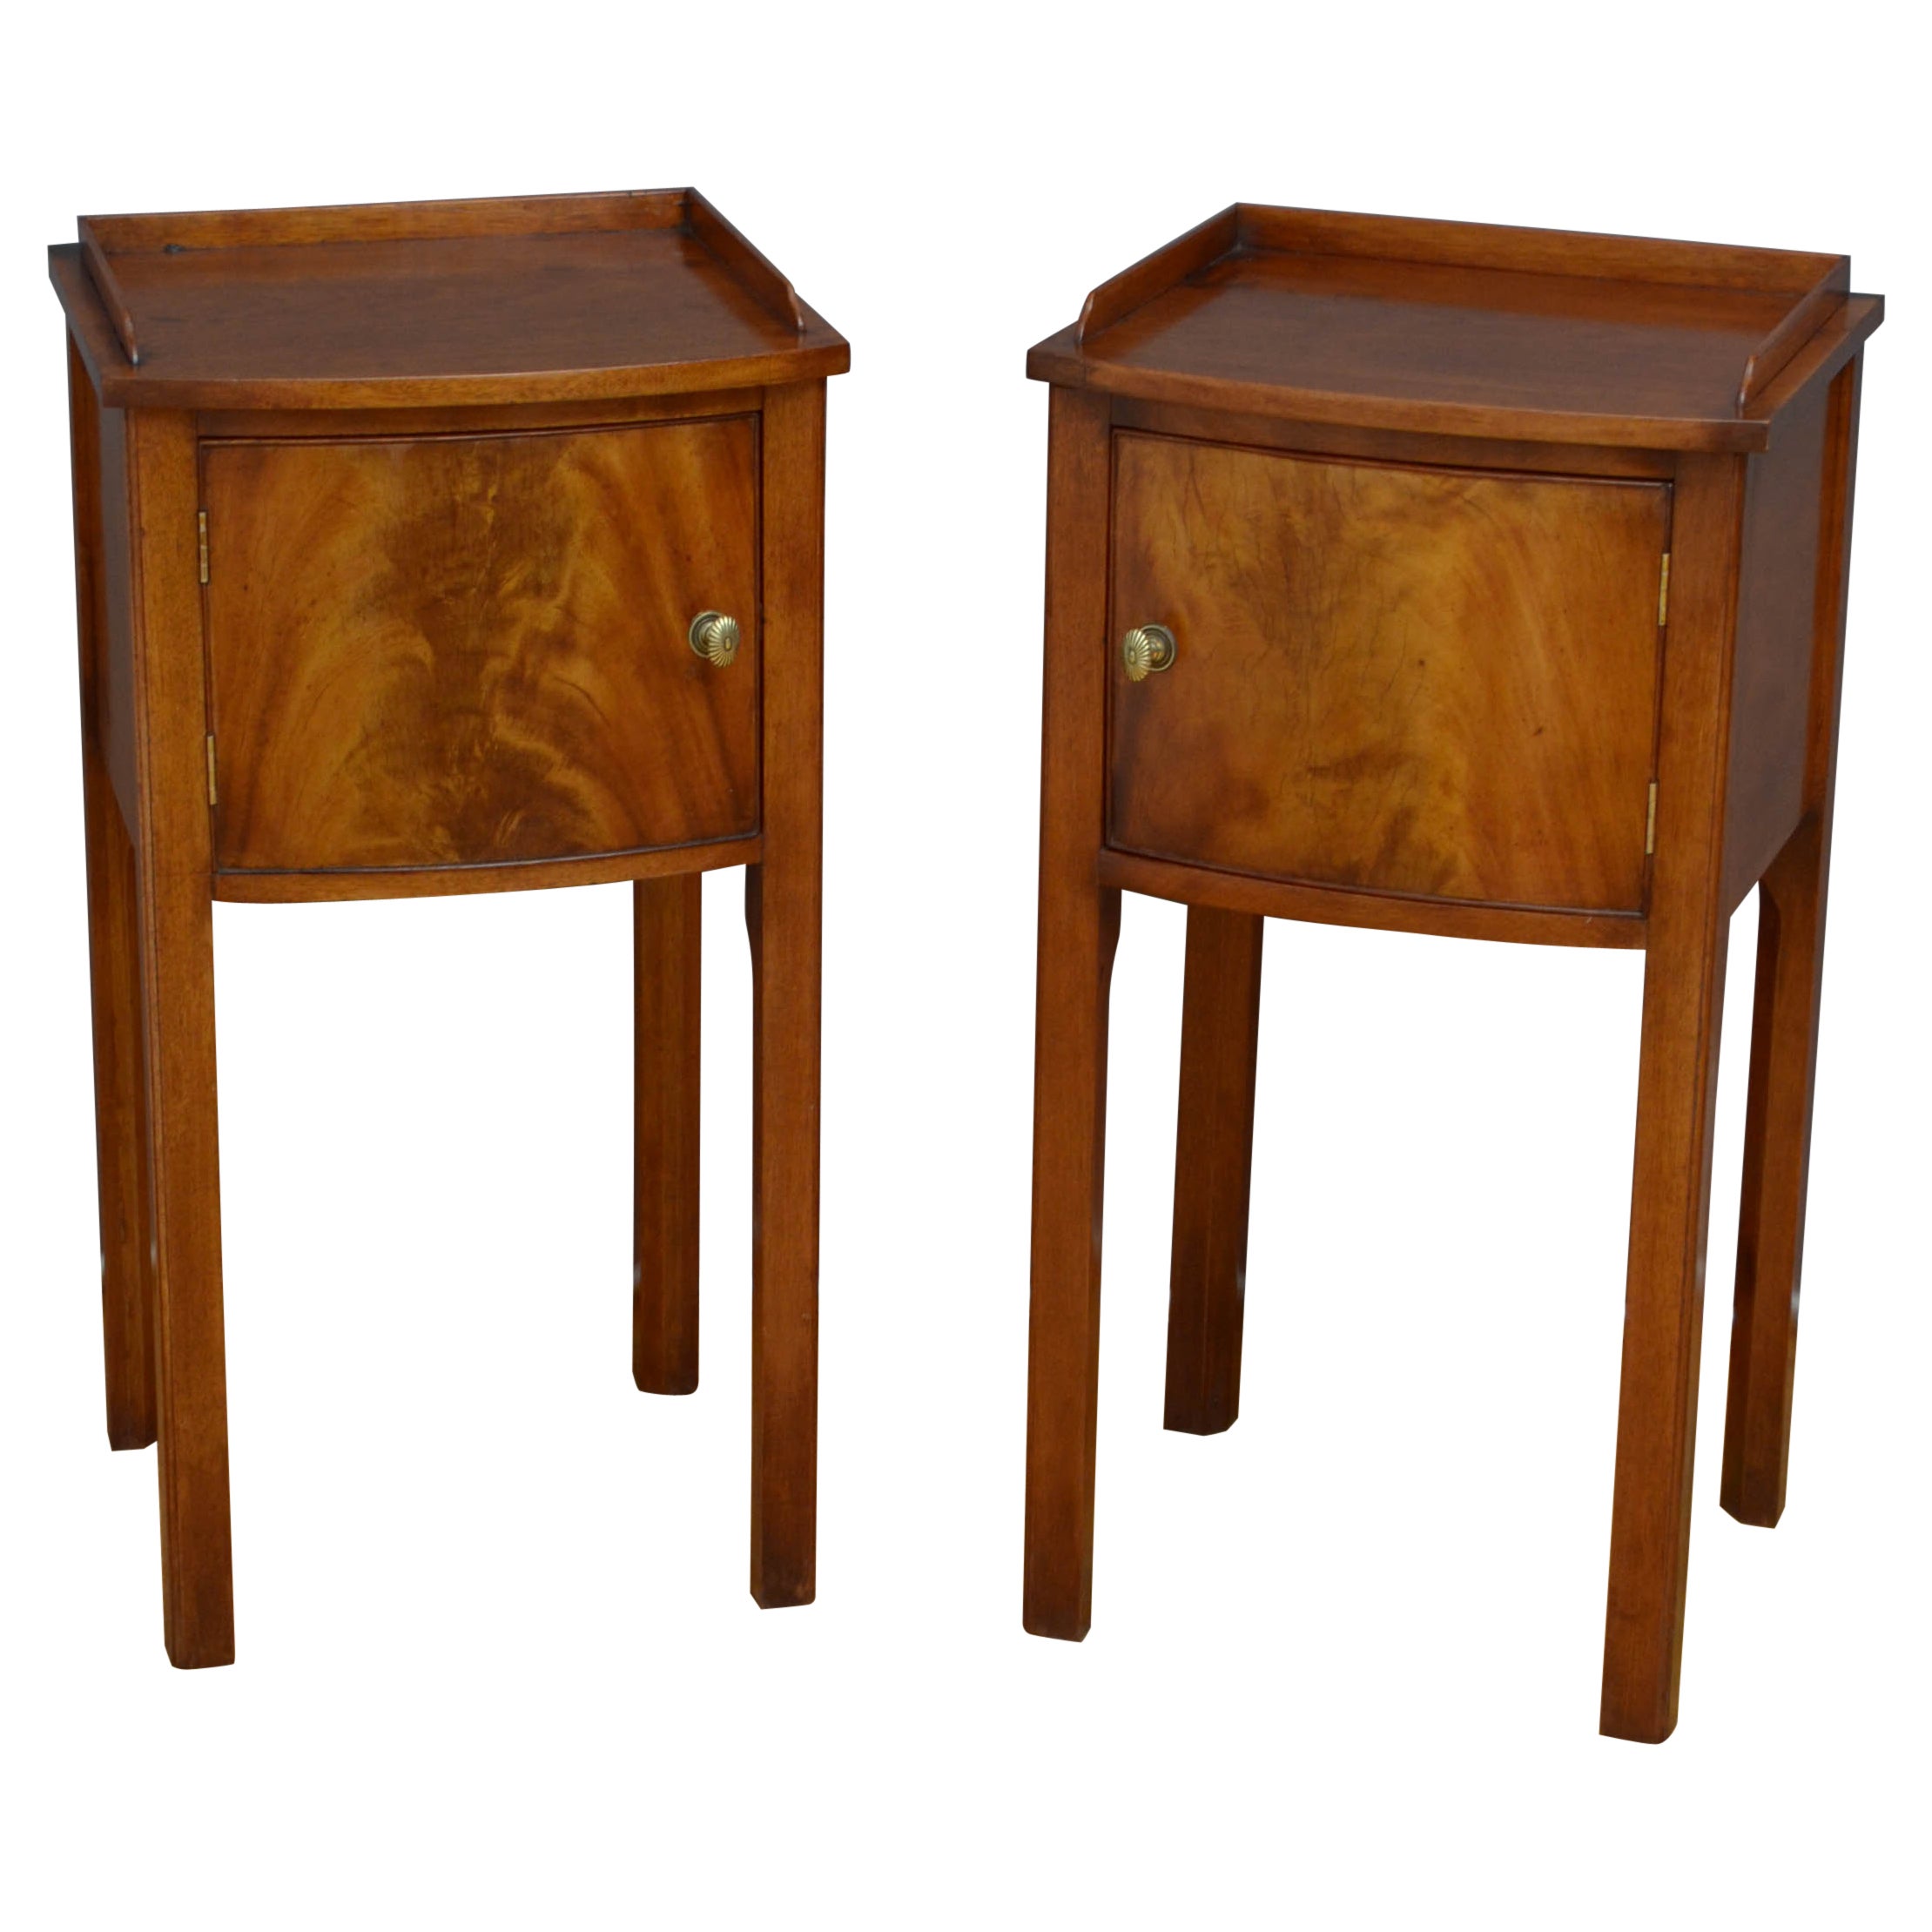 Sheraton Revival Pair of Bedside Cabinets